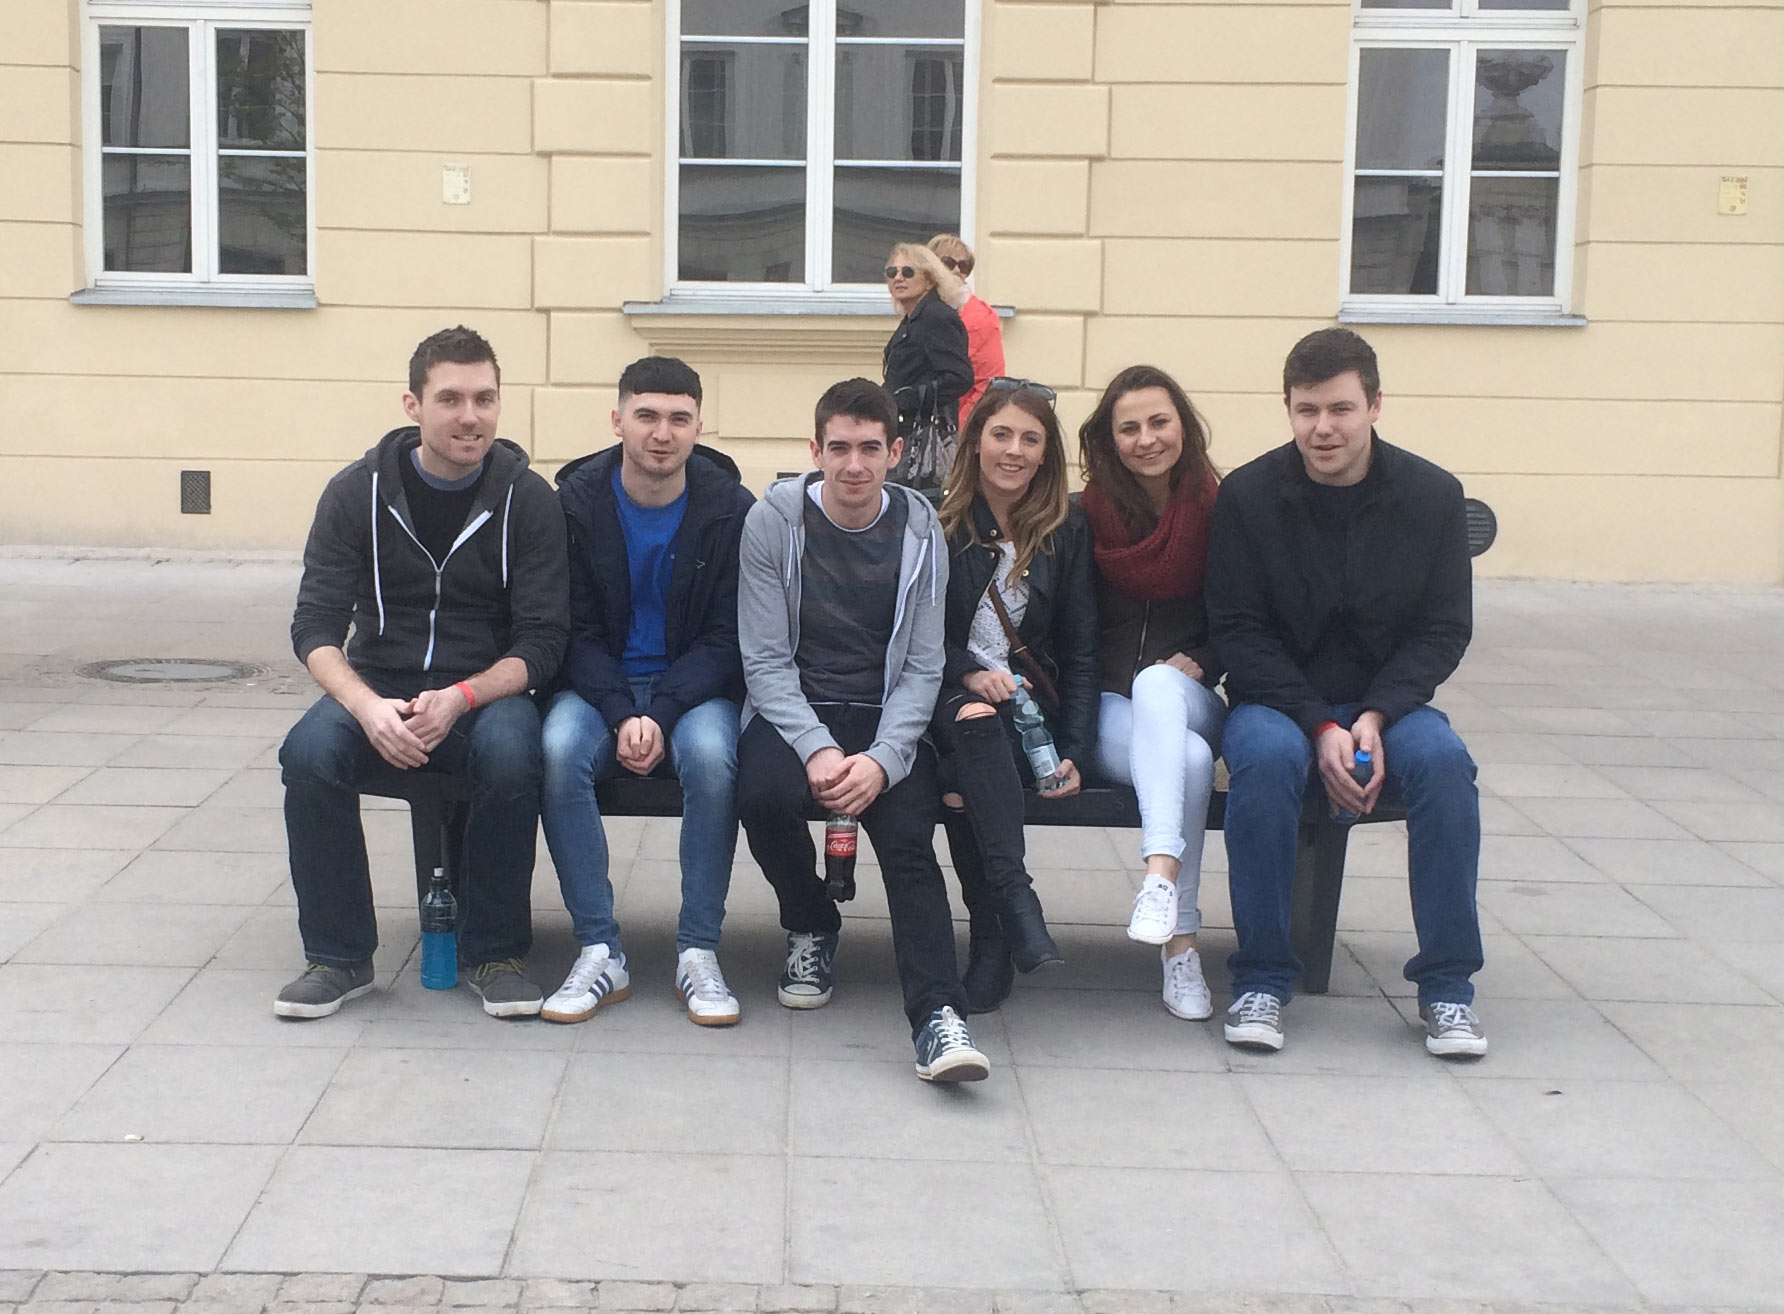 Ruairi Monaghan, Jonathan Loftus, Garvan Doherty, Claire Molony, Gill Casey & Alan Costello on one of the many Chopin themed benches in Warsaw.